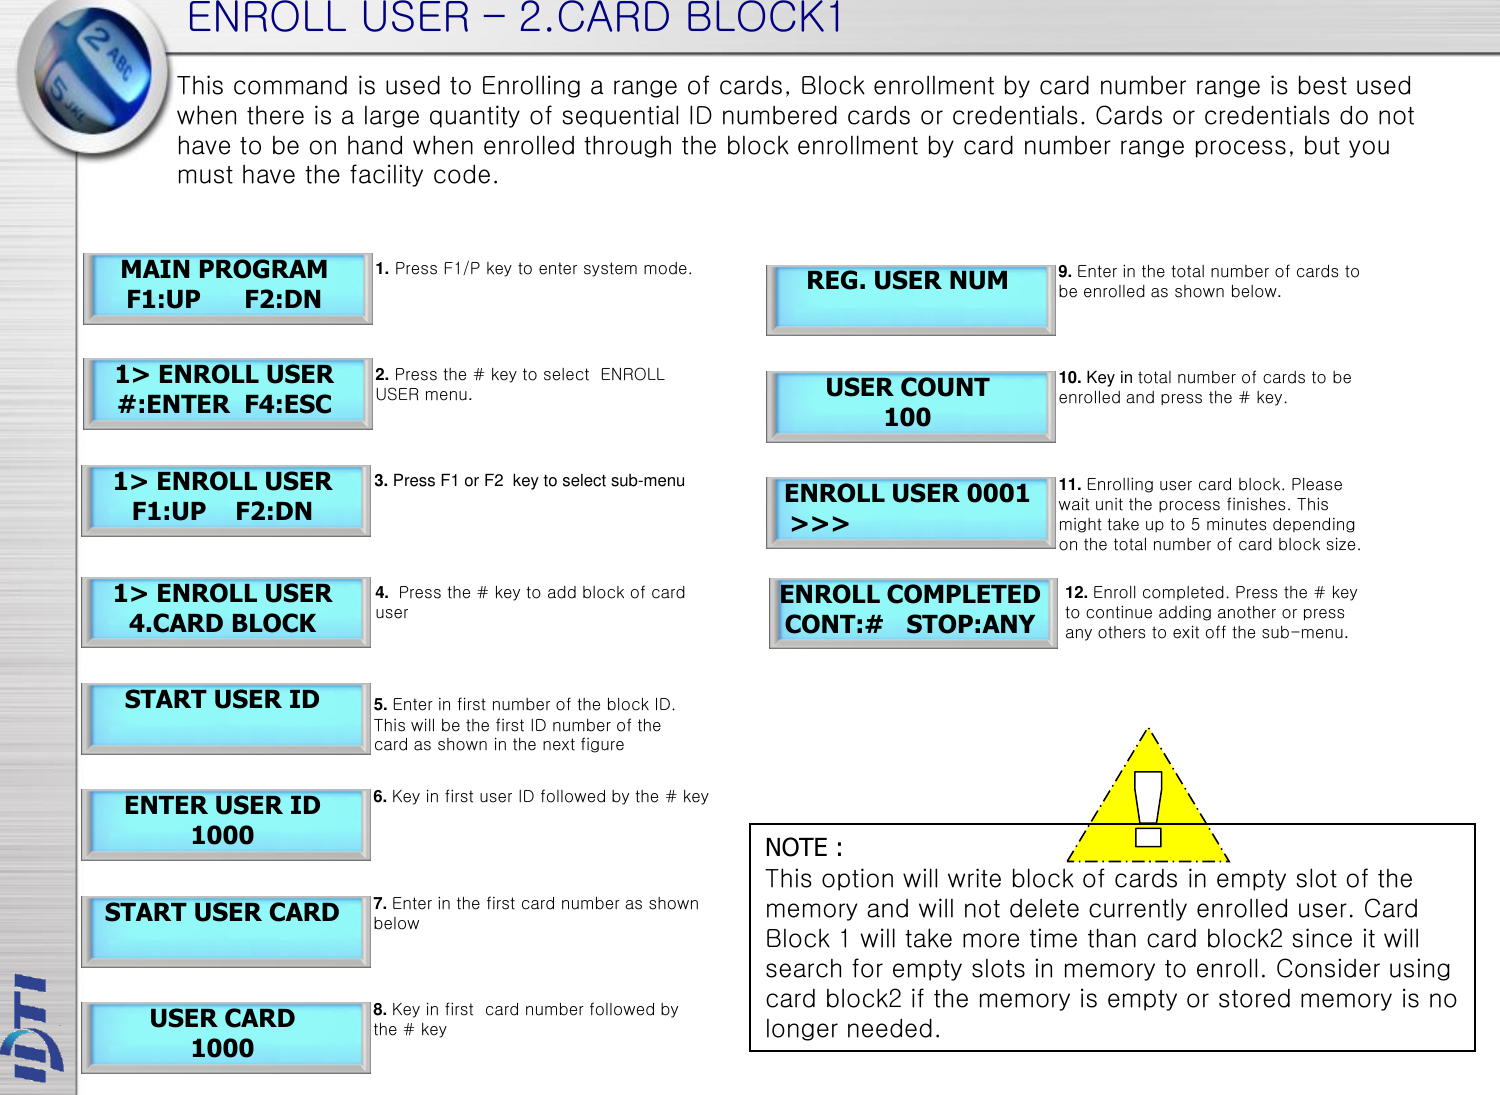 ENROLL USER – 2.CARD BLOCK1 START USER ID ENTER USER ID 1000 START USER CARD USER CARD 1000 REG. USER NUM This command is used to Enrolling a range of cards, Block enrollment by card number range is best used when there is a large quantity of sequential ID numbered cards or credentials. Cards or credentials do not have to be on hand when enrolled through the block enrollment by card number range process, but you must have the facility code. ENROLL USER 0001   &gt;&gt;&gt; 1&gt; ENROLL USER 4.CARD BLOCK 6. Key in first user ID followed by the # key 7. Enter in the first card number as shown  below 8. Key in first  card number followed by the # key 9. Enter in the total number of cards to be enrolled as shown below.  USER COUNT 100 10. Key in total number of cards to be enrolled and press the # key. 11. Enrolling user card block. Please wait unit the process finishes. This might take up to 5 minutes depending on the total number of card block size. ENROLL COMPLETED CONT:#   STOP:ANY MAIN PROGRAM F1:UP      F2:DN 1&gt; ENROLL USER #:ENTER  F4:ESC 1&gt; ENROLL USER F1:UP    F2:DN 1. Press F1/P key to enter system mode. 2. Press the # key to select  ENROLL USER menu. 4.  Press the # key to add block of card  user 5. Enter in first number of the block ID. This will be the first ID number of the card as shown in the next figure 3. Press F1 or F2  key to select sub-menu  12. Enroll completed. Press the # key to continue adding another or press any others to exit off the sub-menu.  NOTE : This option will write block of cards in empty slot of the memory and will not delete currently enrolled user. Card Block 1 will take more time than card block2 since it will search for empty slots in memory to enroll. Consider using card block2 if the memory is empty or stored memory is no longer needed.  